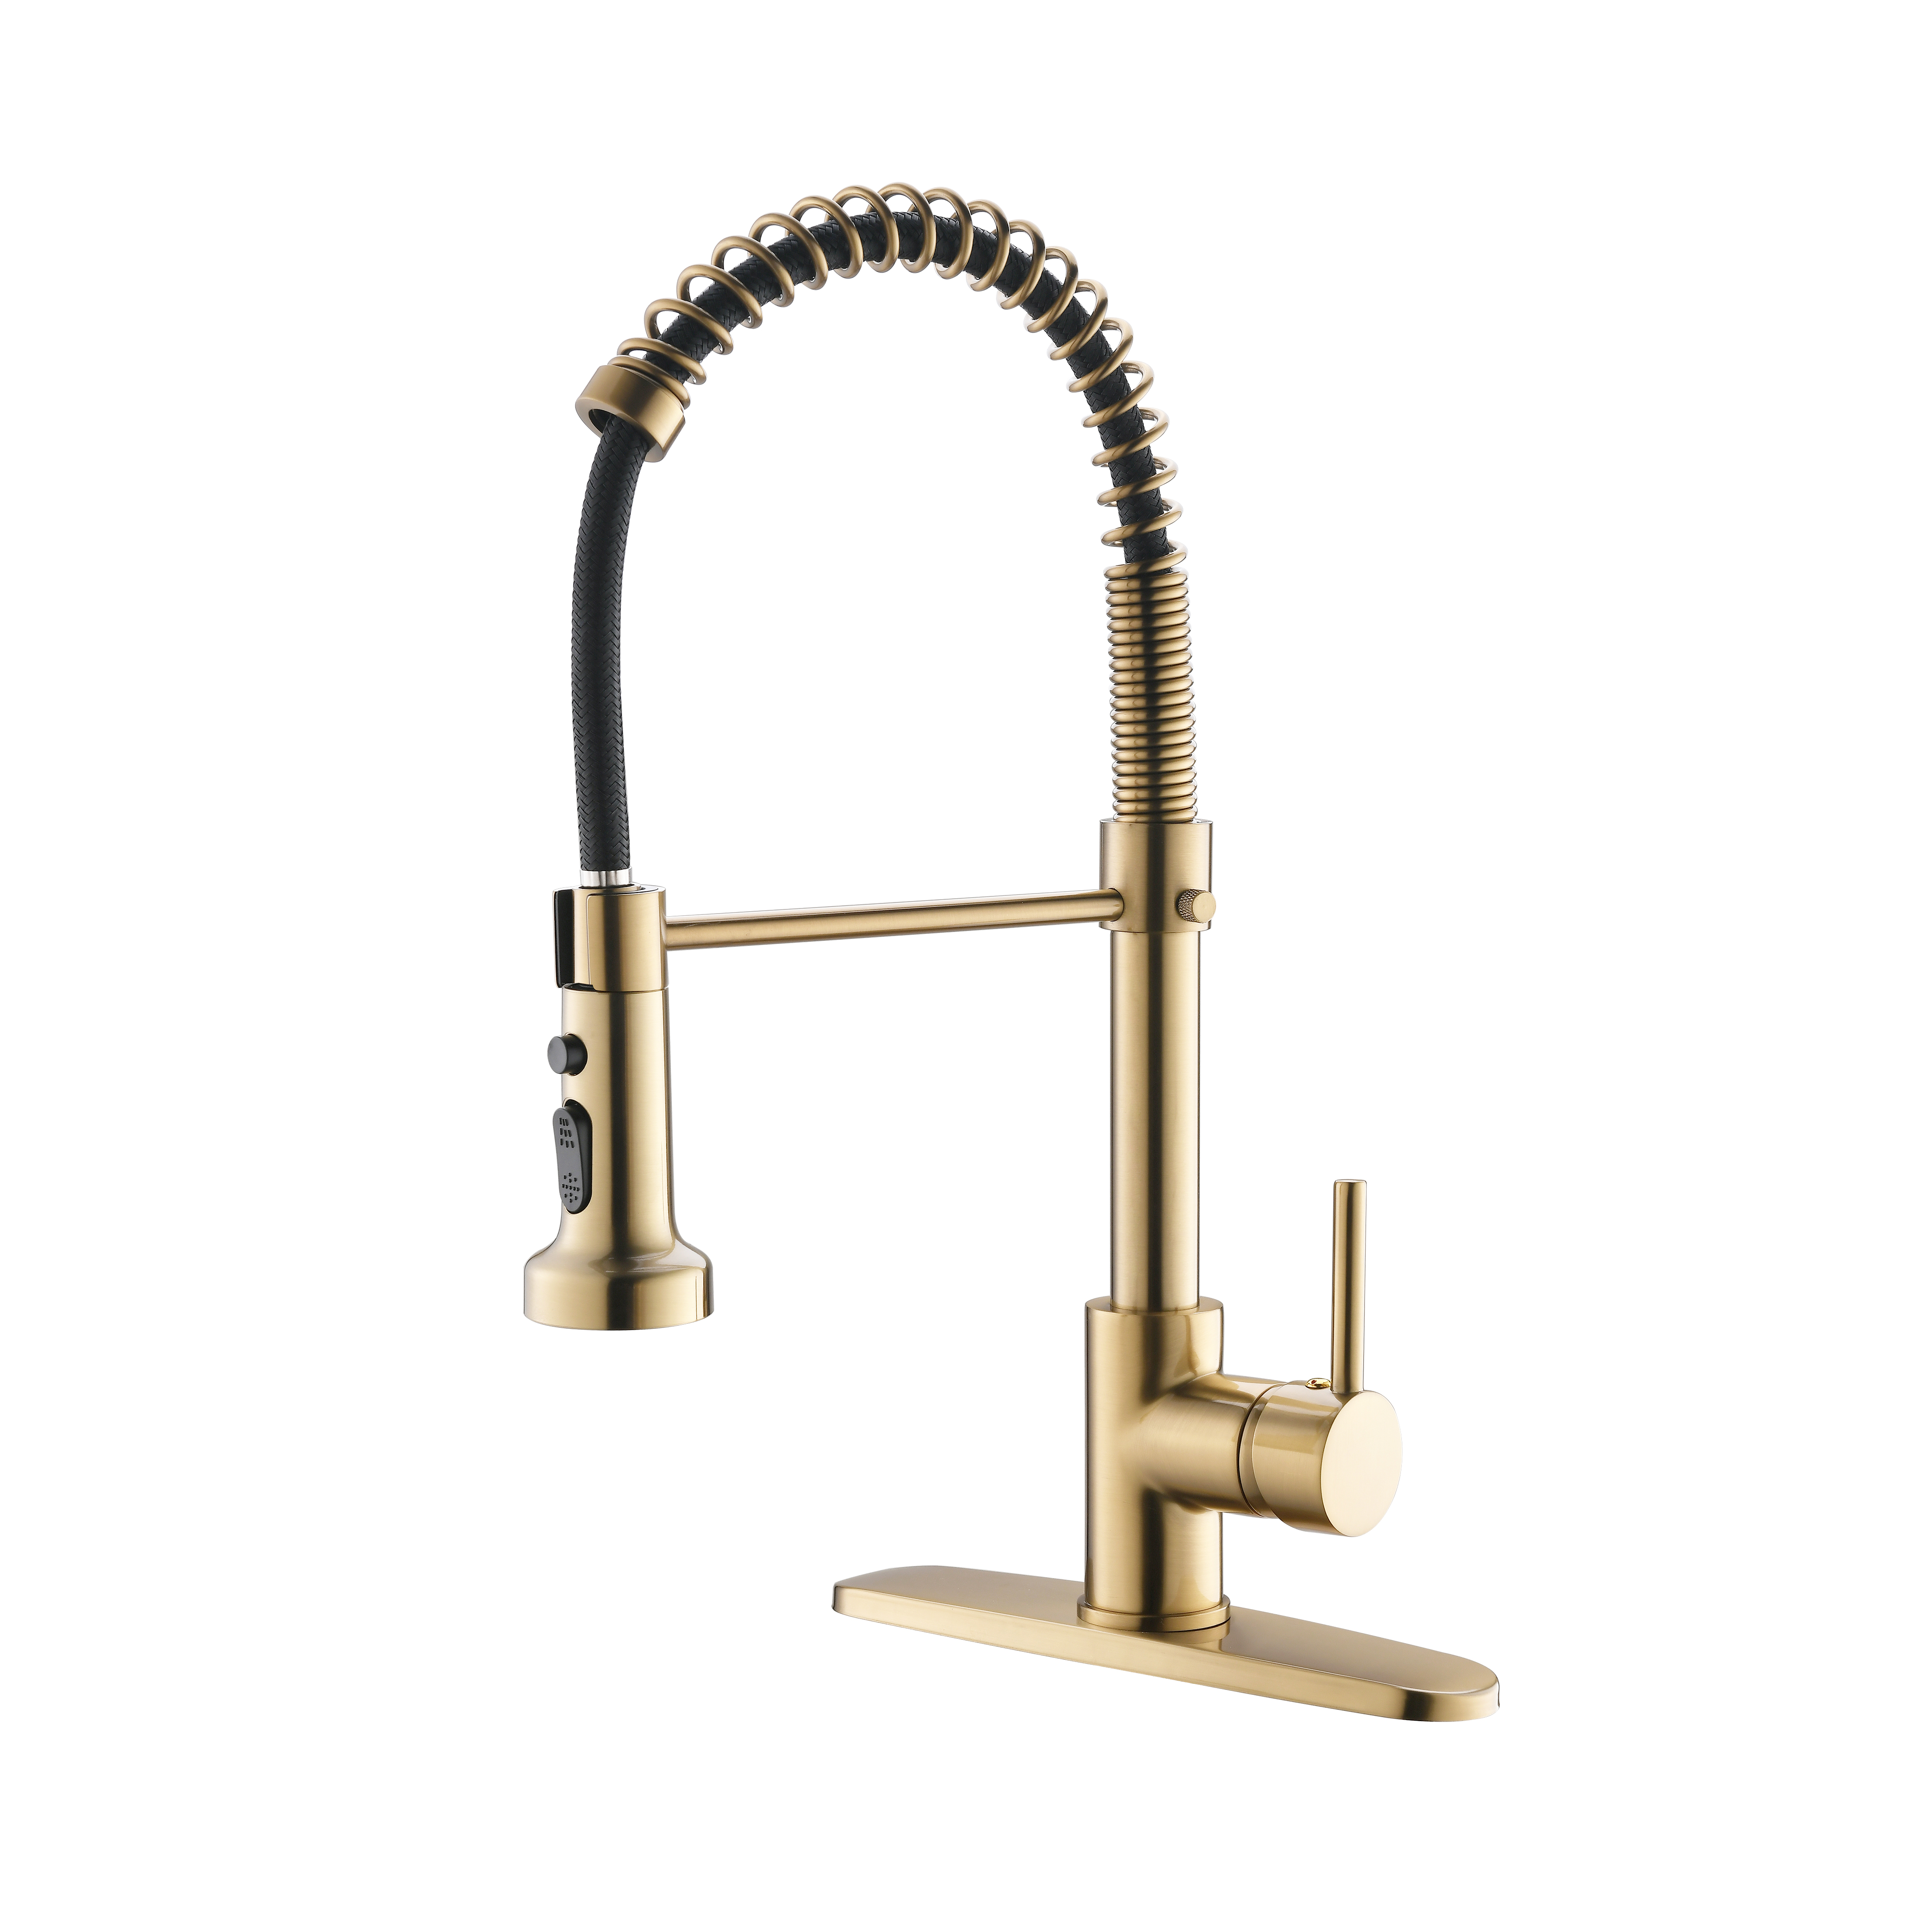 FLG High quality gold brass single hole mixer kitchen faucet 